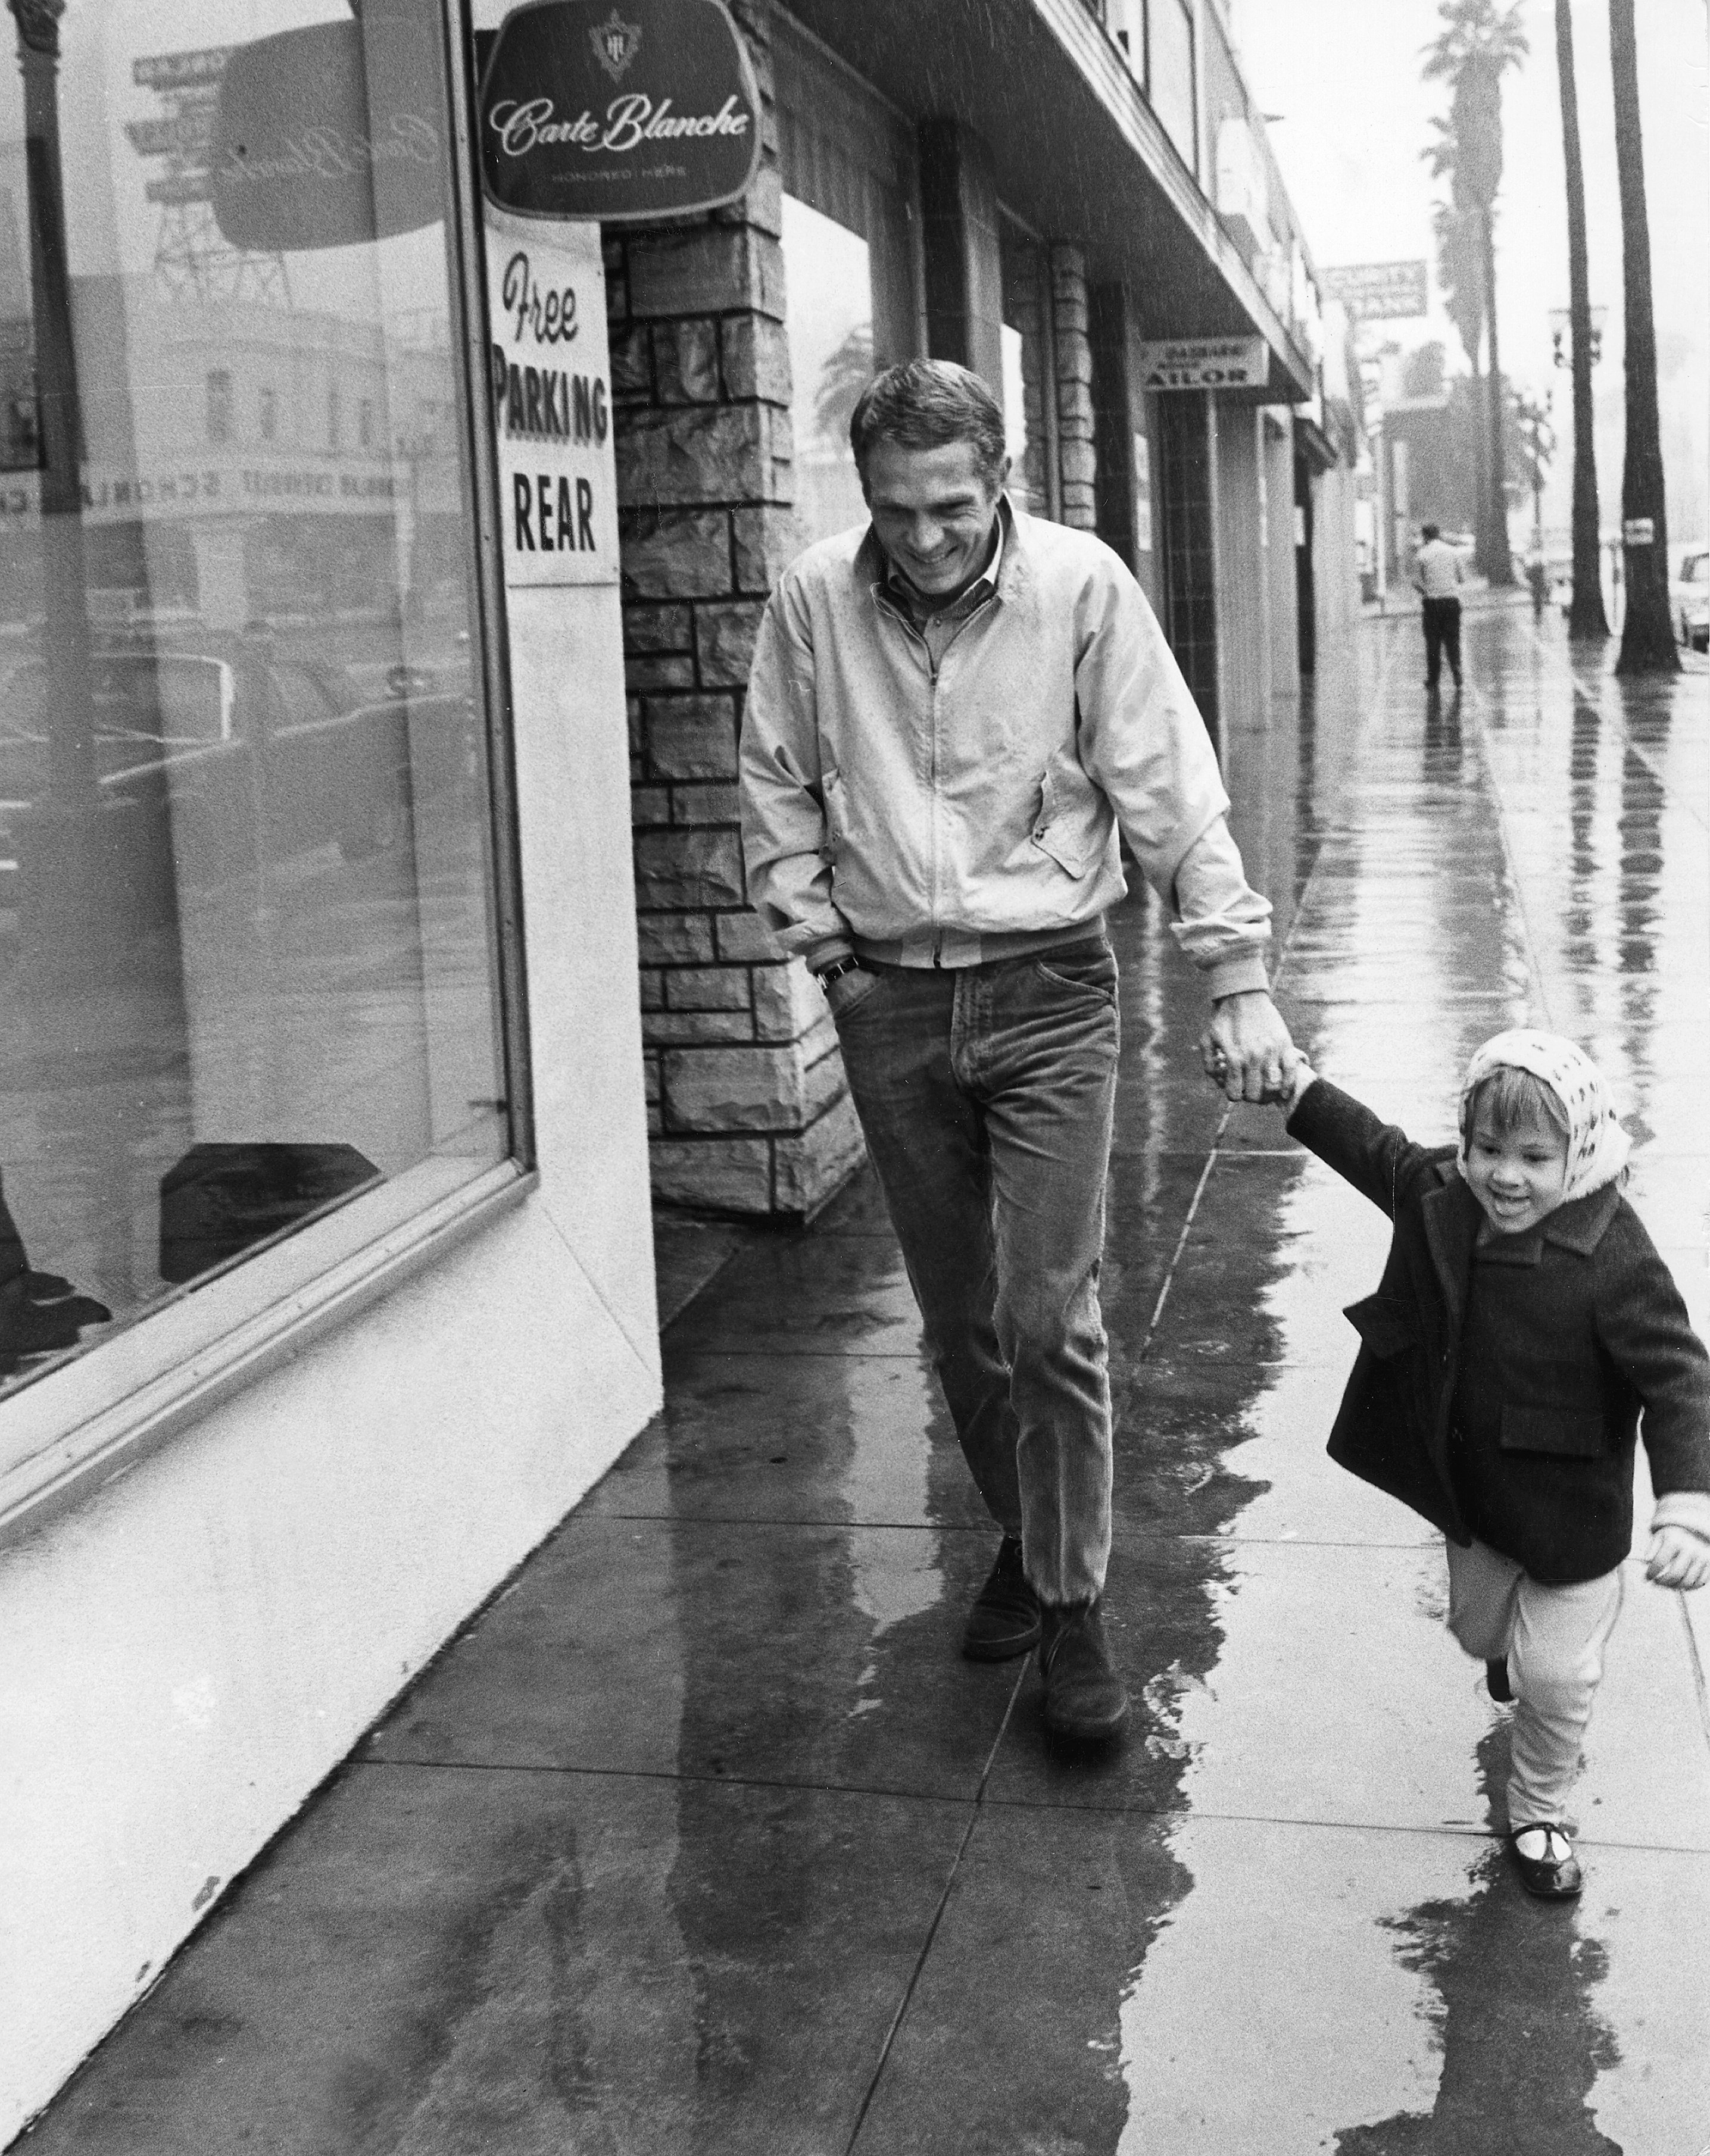 Steve McQueen pictured with his young daughter Terry McQueen on the sidewalk┃Source: Getty Images